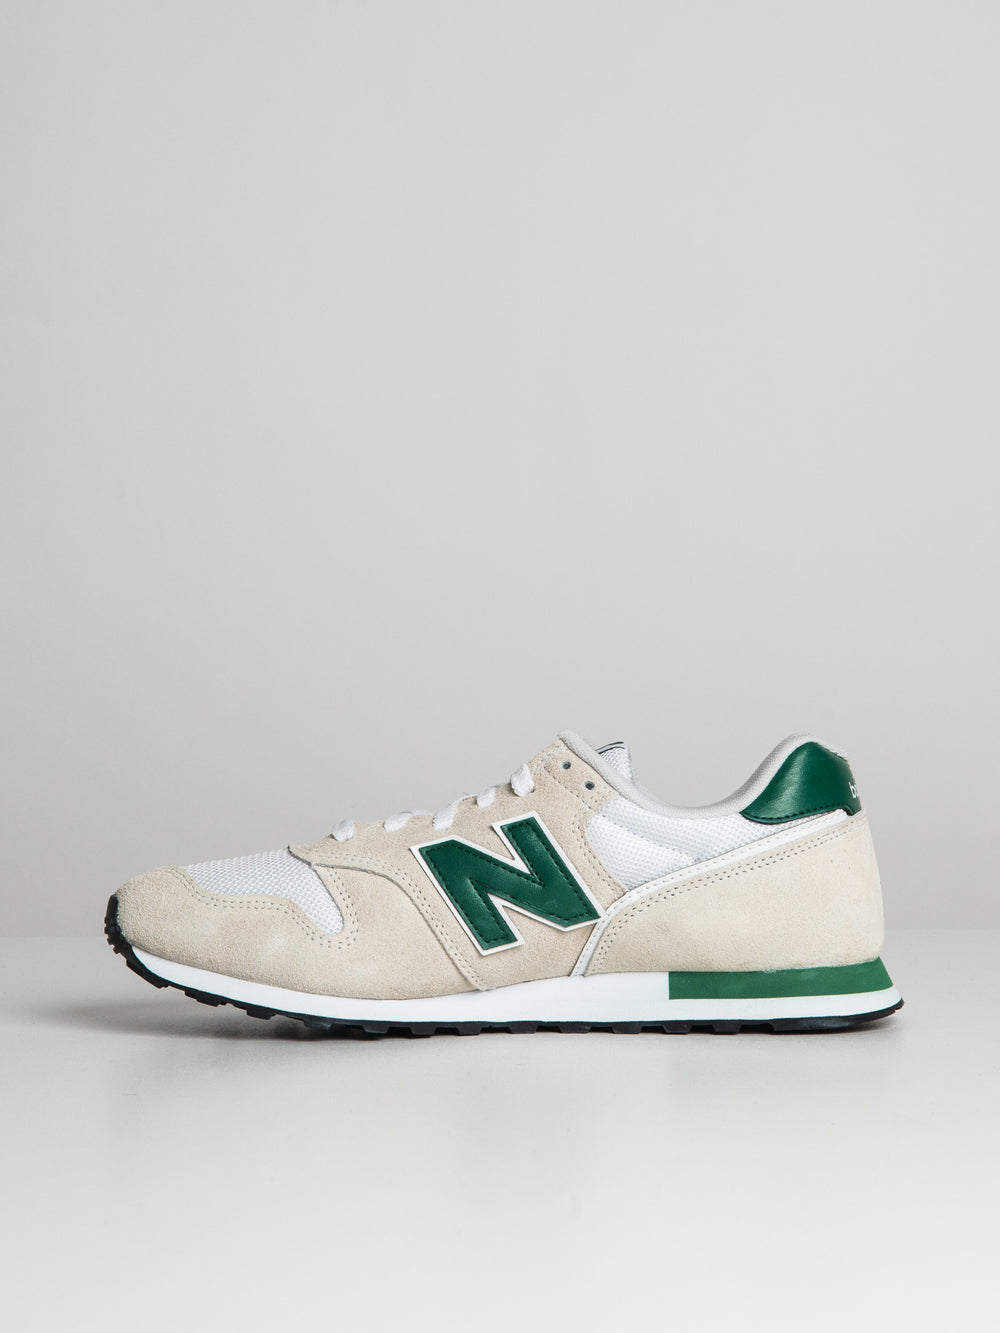 MENS NEW BALANCE THE 373 - CLEARANCE